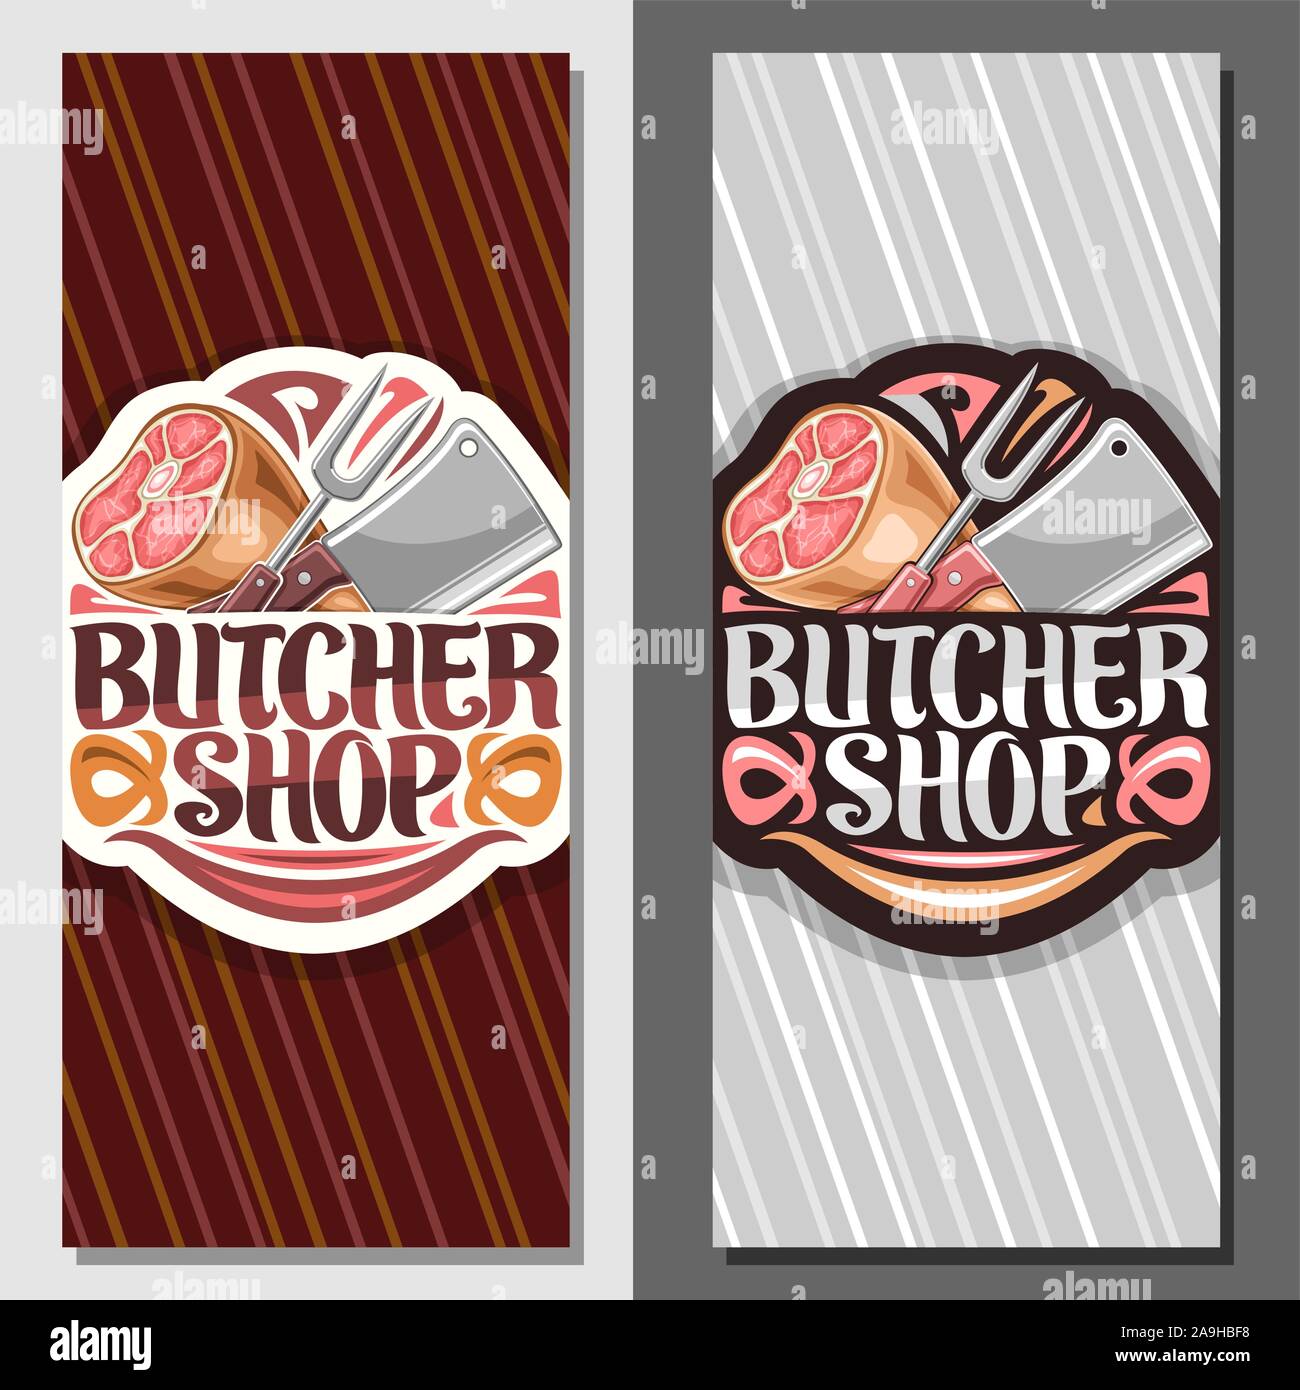 Vector vertical banners for Butcher Shop, coupon with illustration of premium leg ham, big fork and cleaver, voucher with original brush lettering for Stock Vector